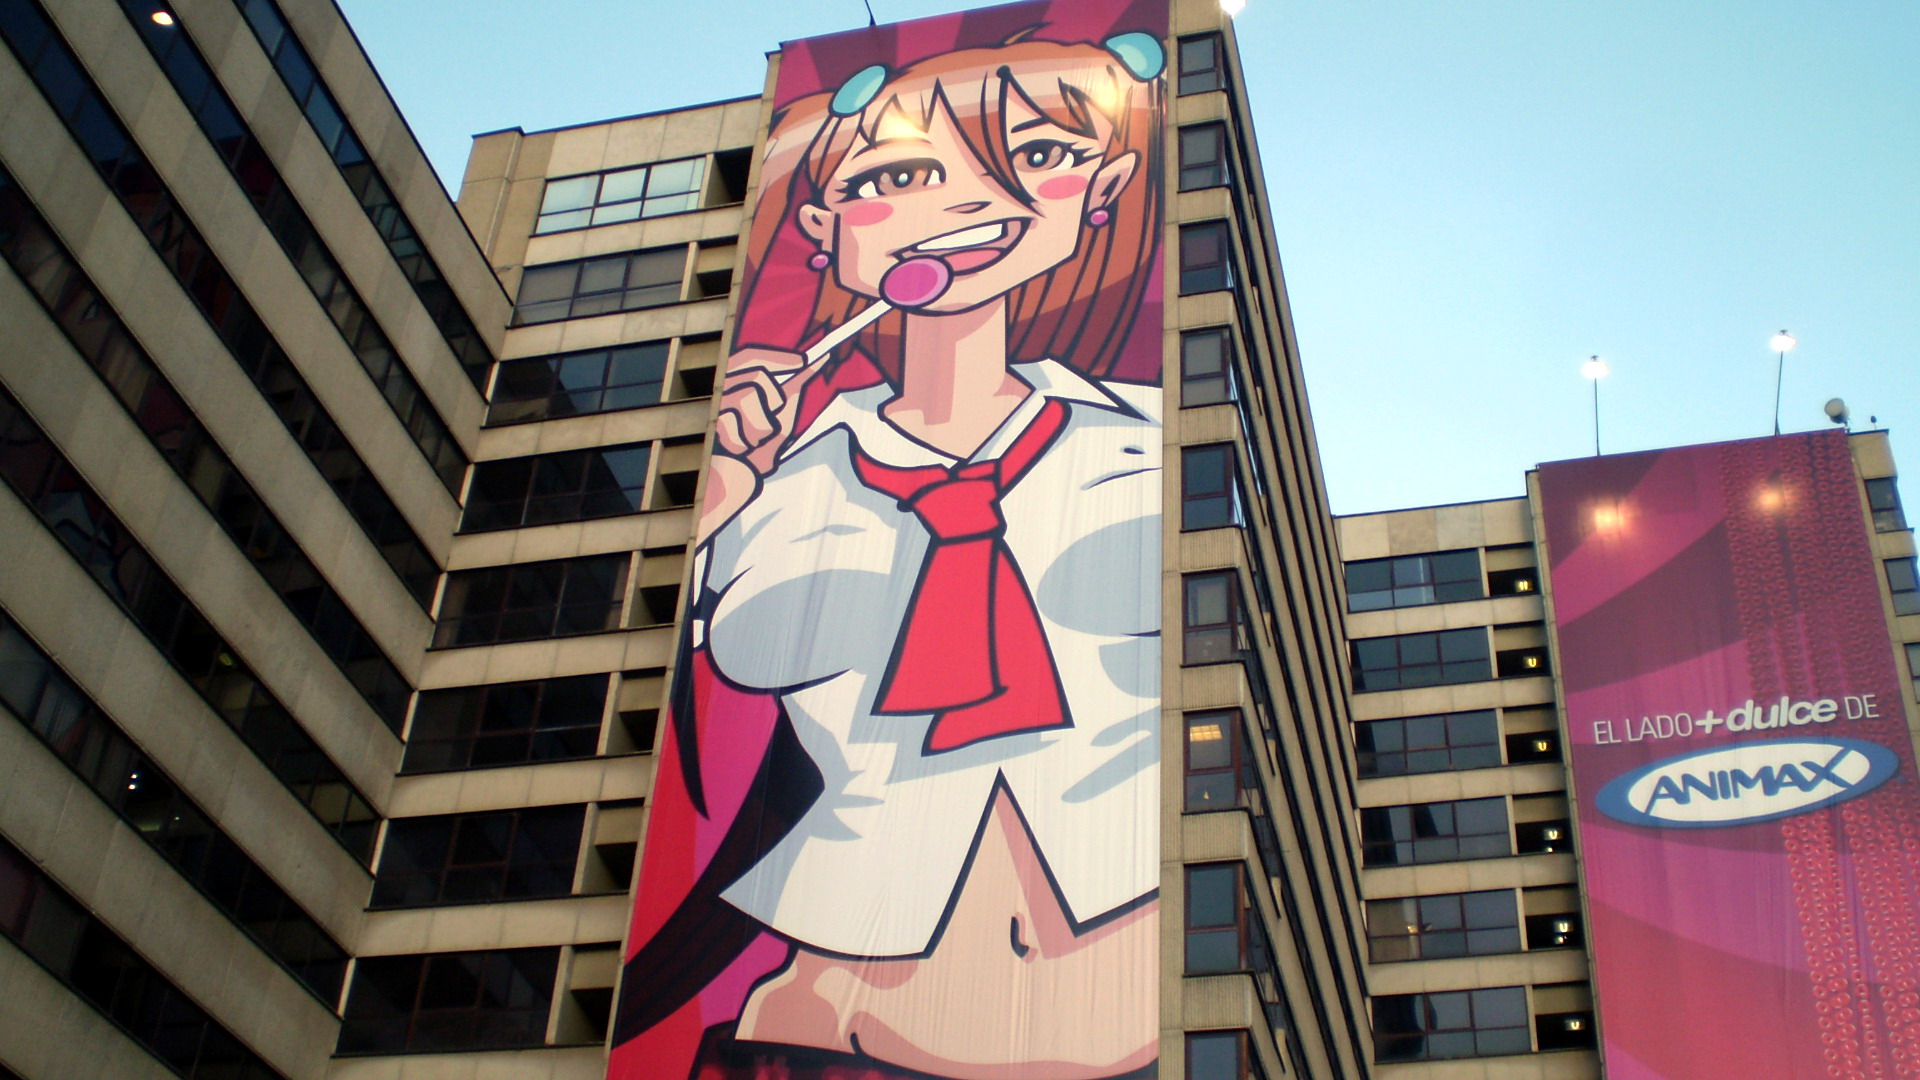 the large banner shows an anime girl standing with a toothbrush in her mouth